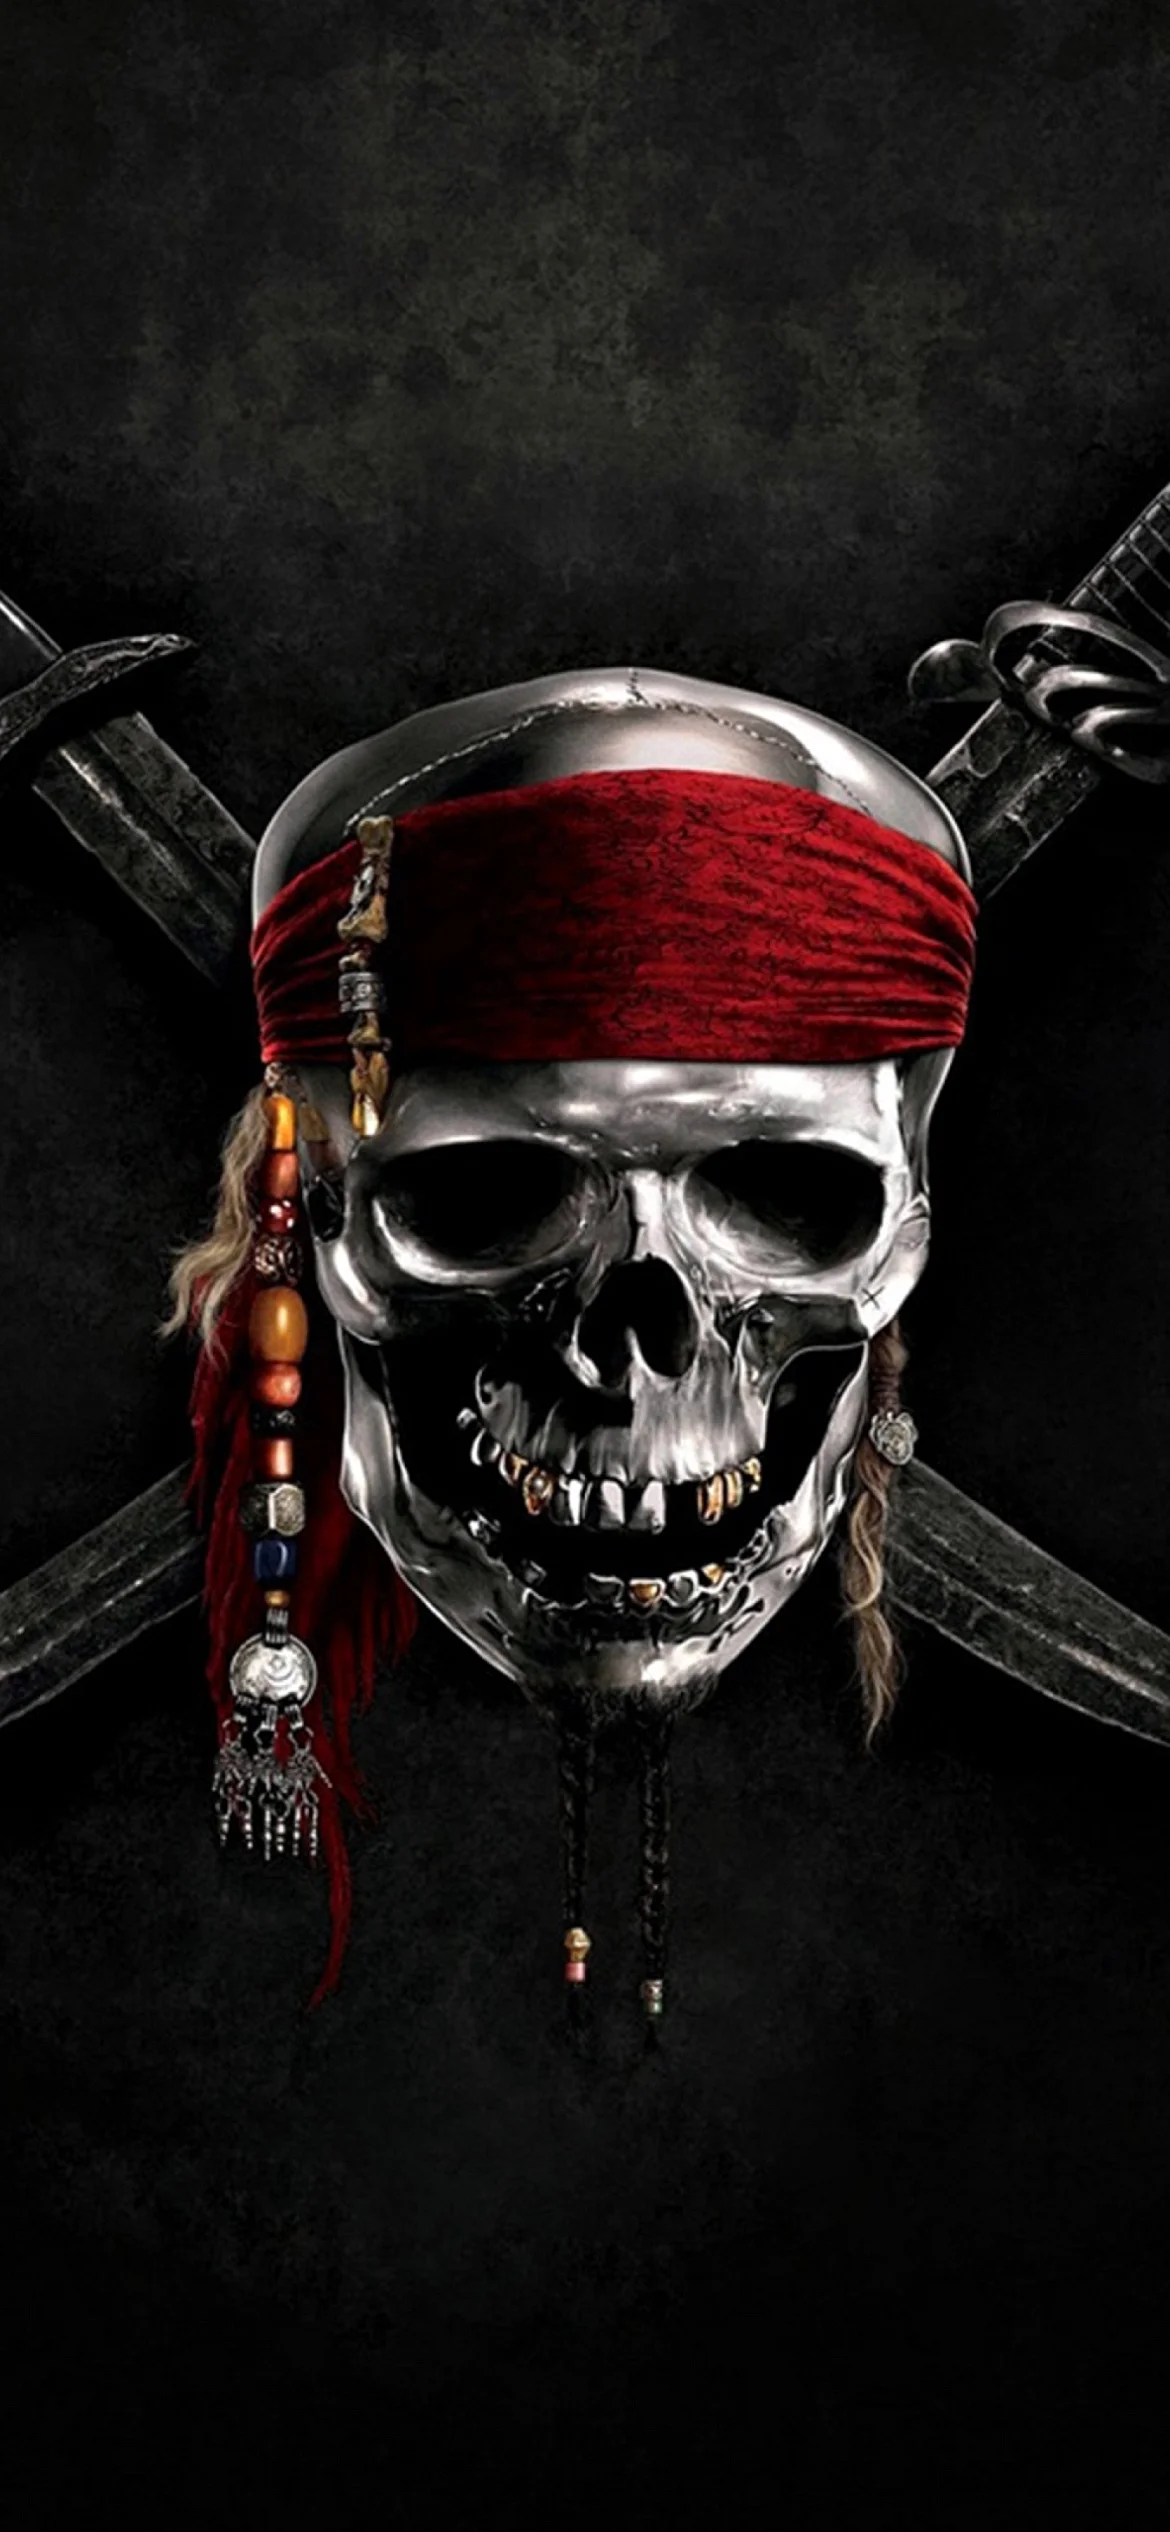 Pirate Skull Wallpaper for iPhone 12 Pro